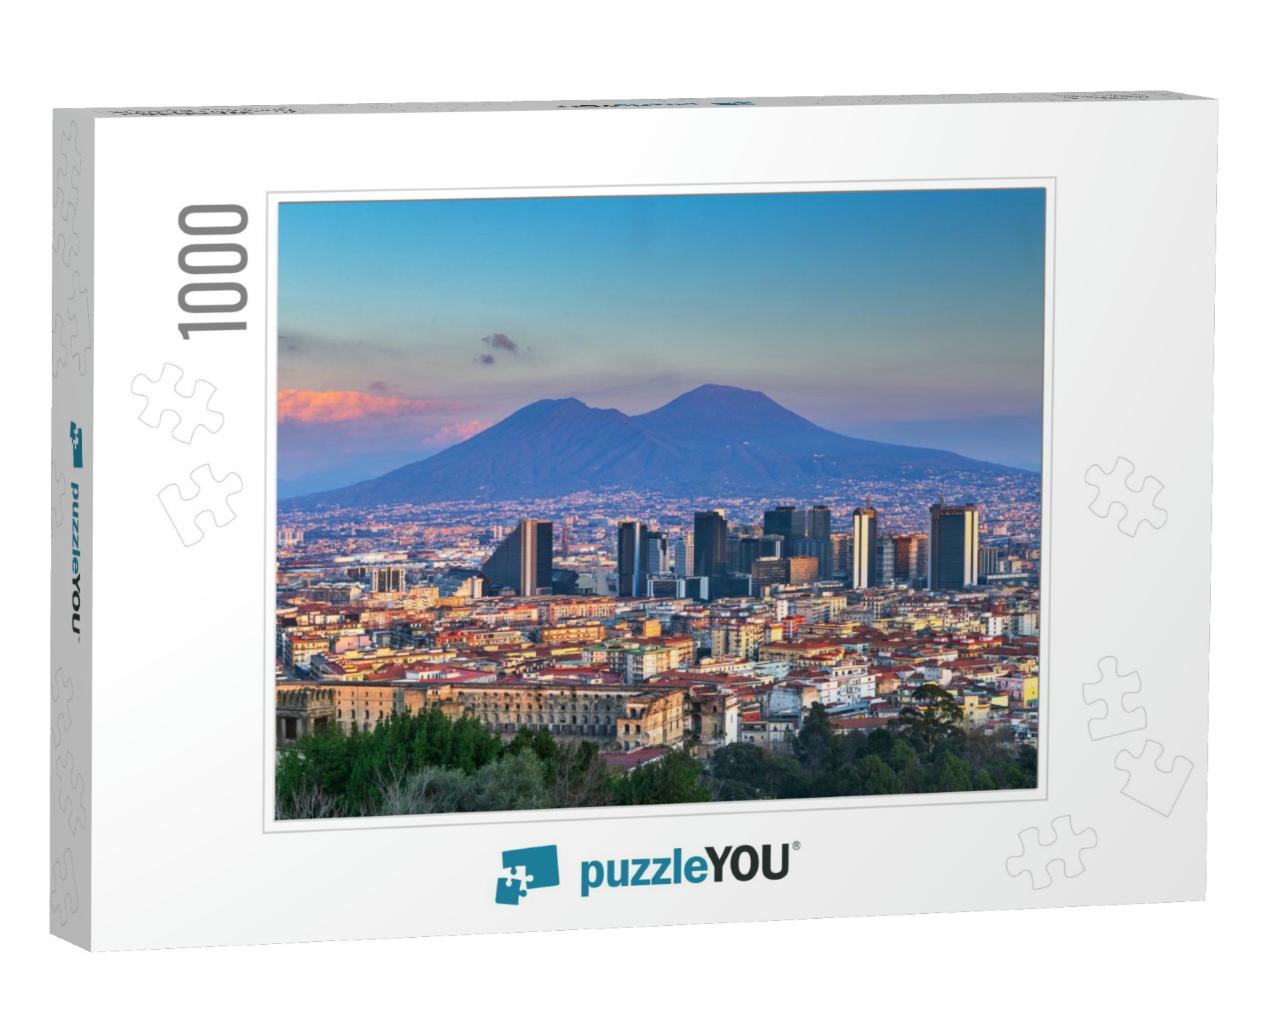 Naples, Italy with the Financial District Skyline... Jigsaw Puzzle with 1000 pieces